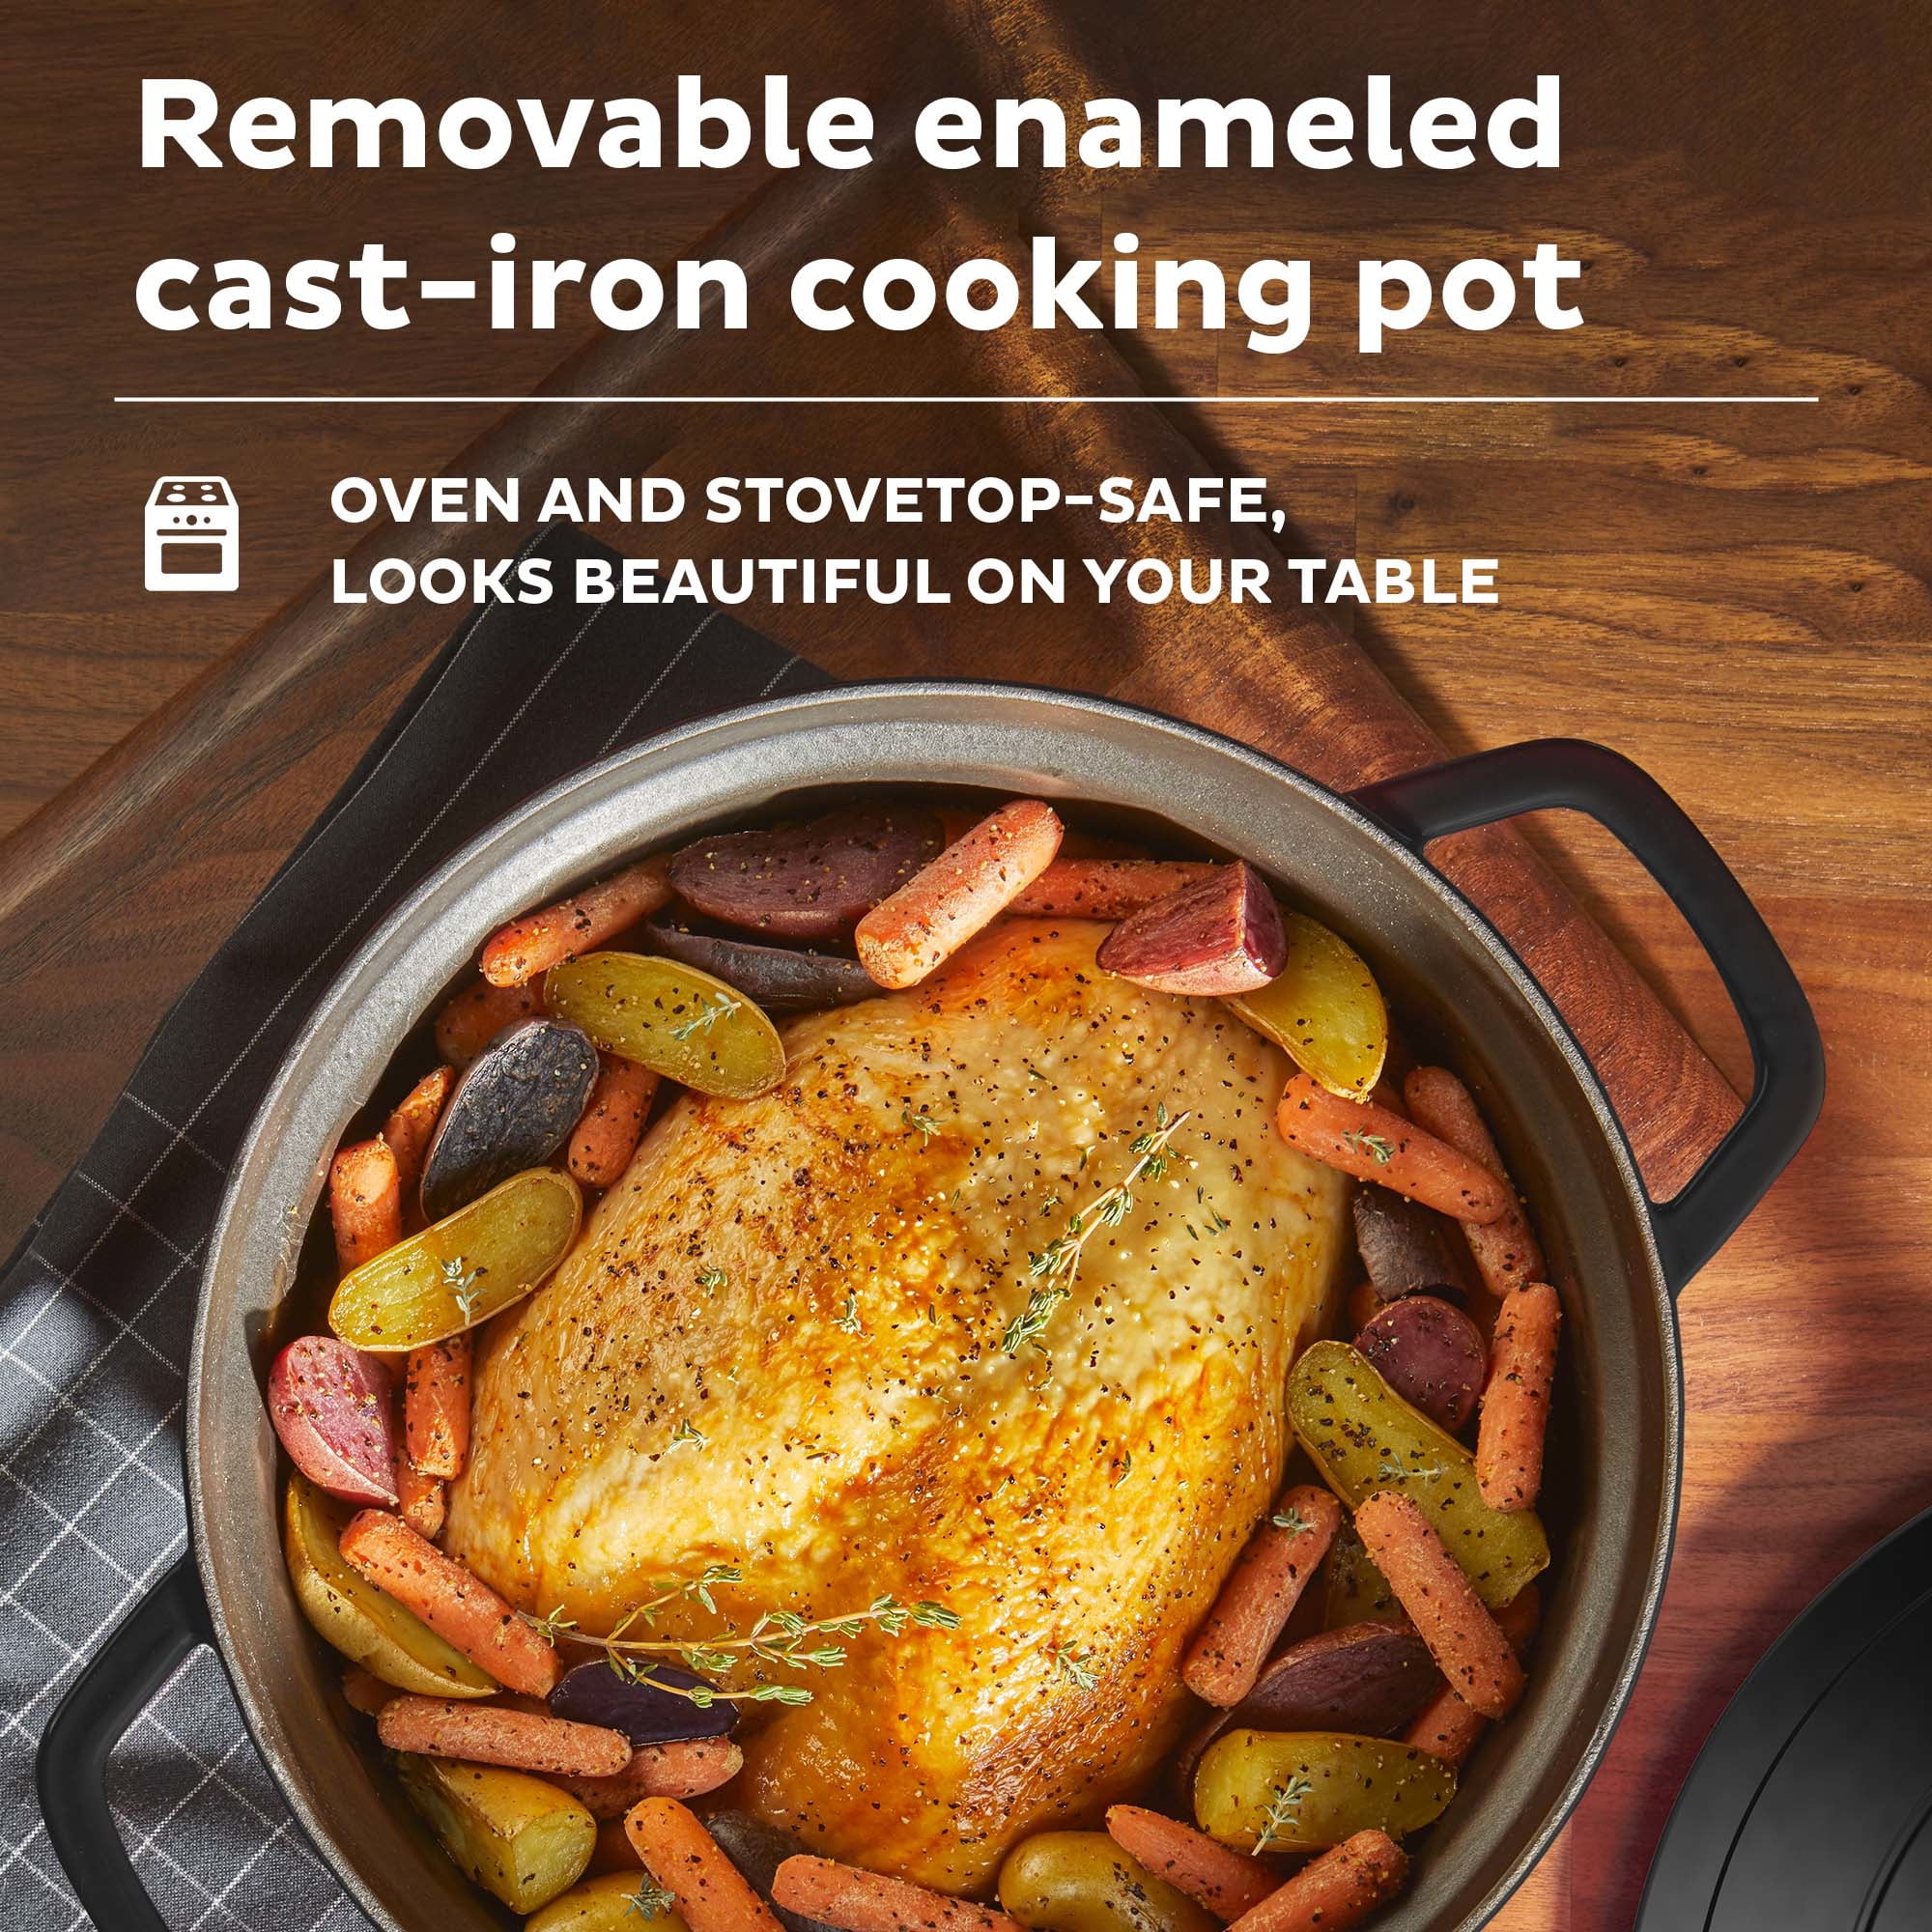 KOOC 10-in-1 Electric Dutch Oven, 6-Quart Blue, Slow Cook, Braise